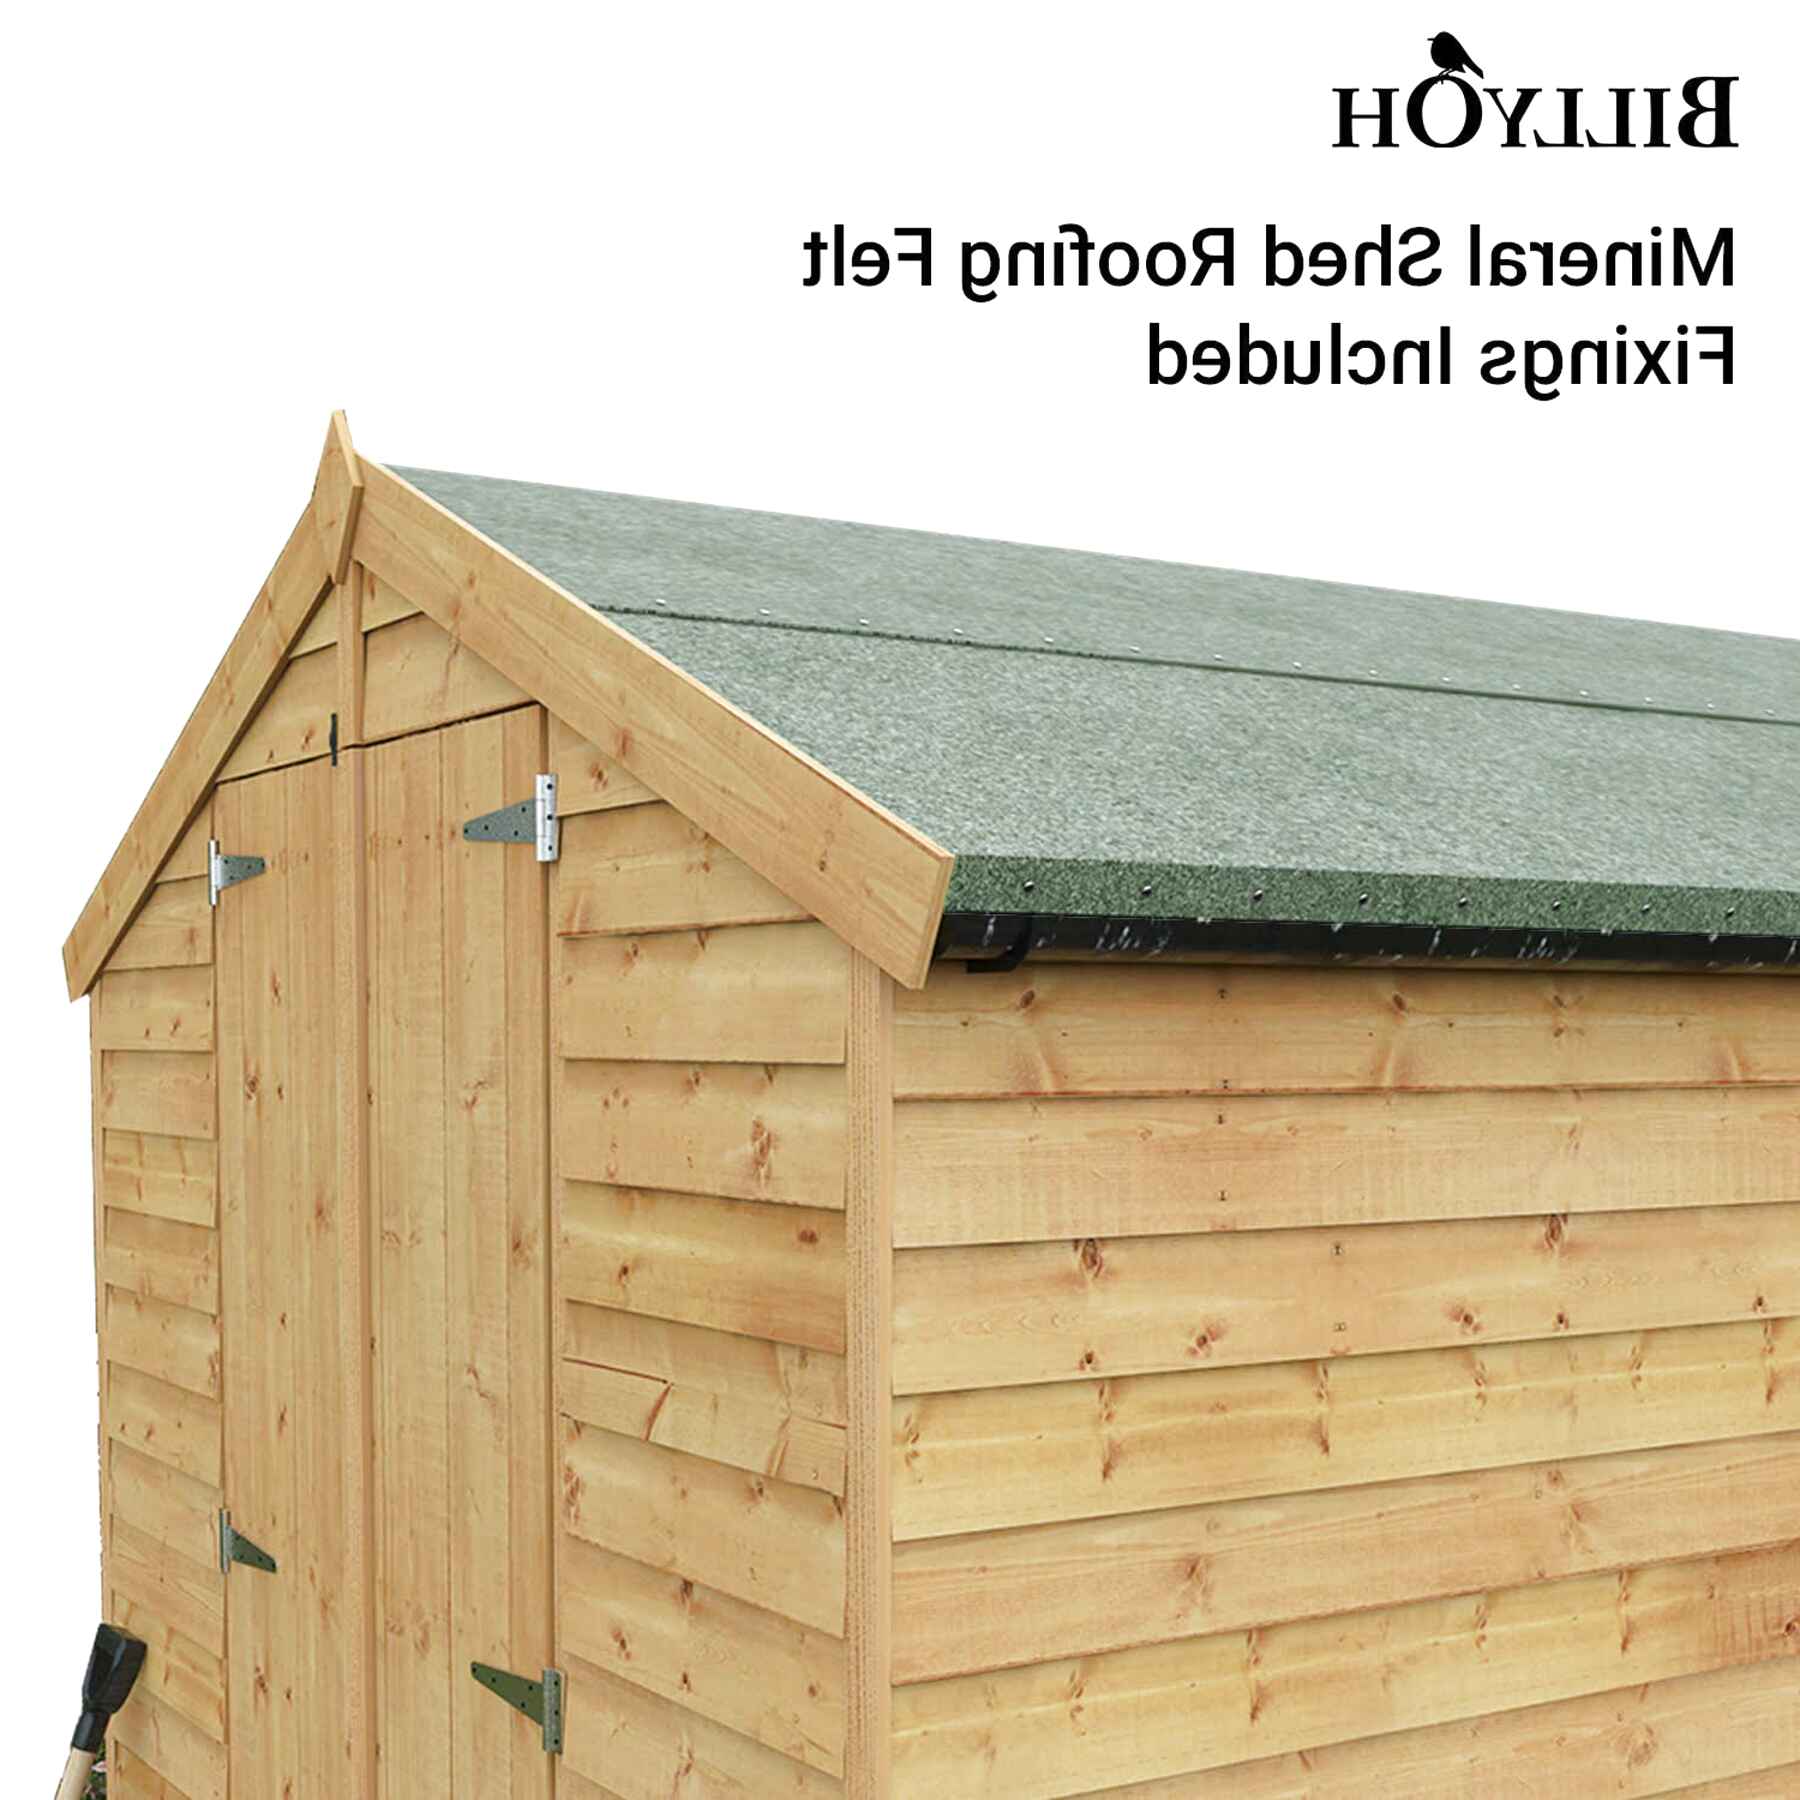 Shed Roofing Felt for sale in UK View 78 bargains